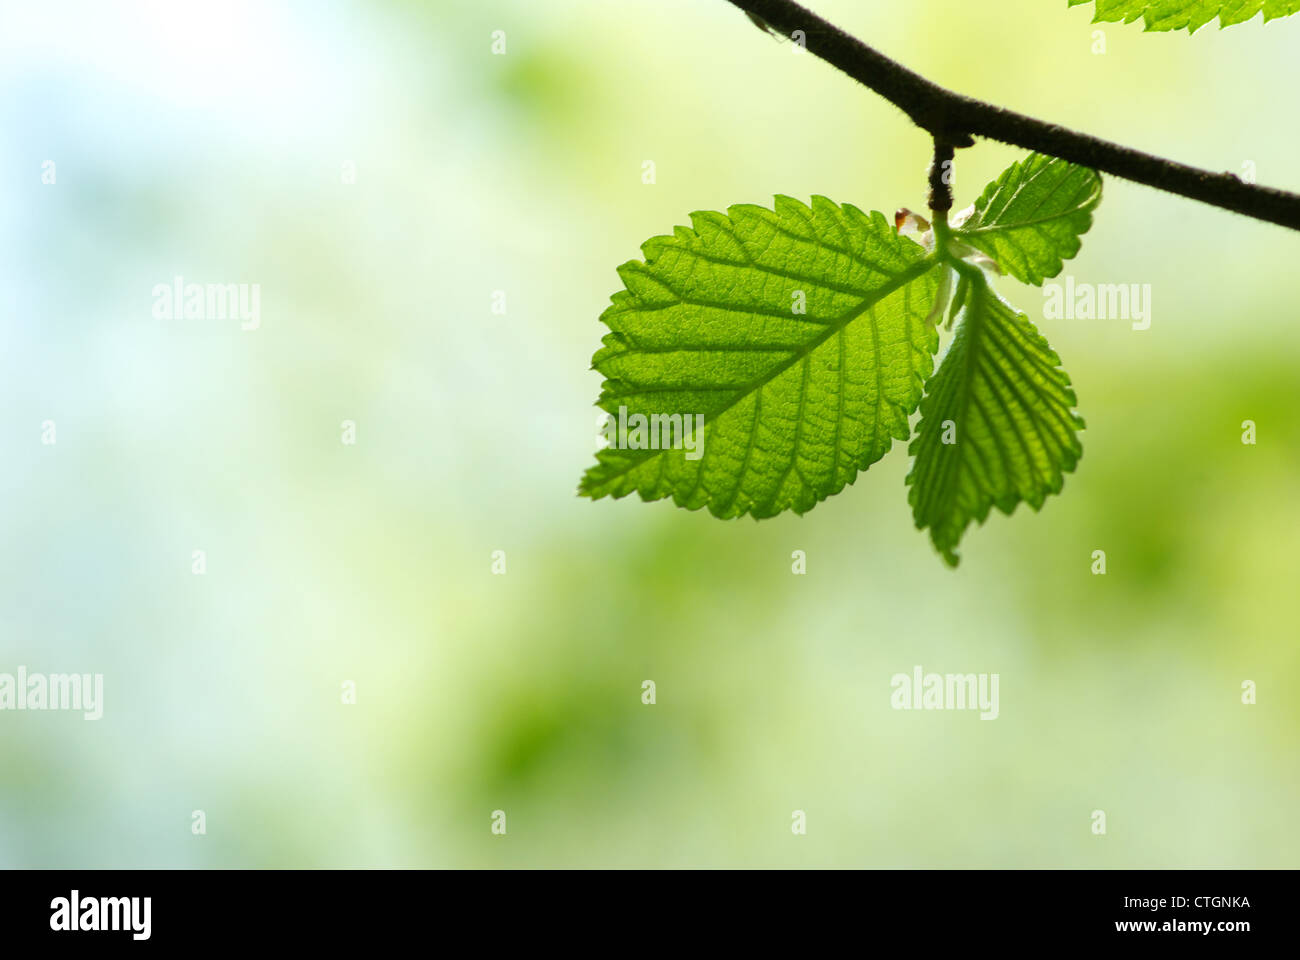 green leaves background in sunny day Stock Photo